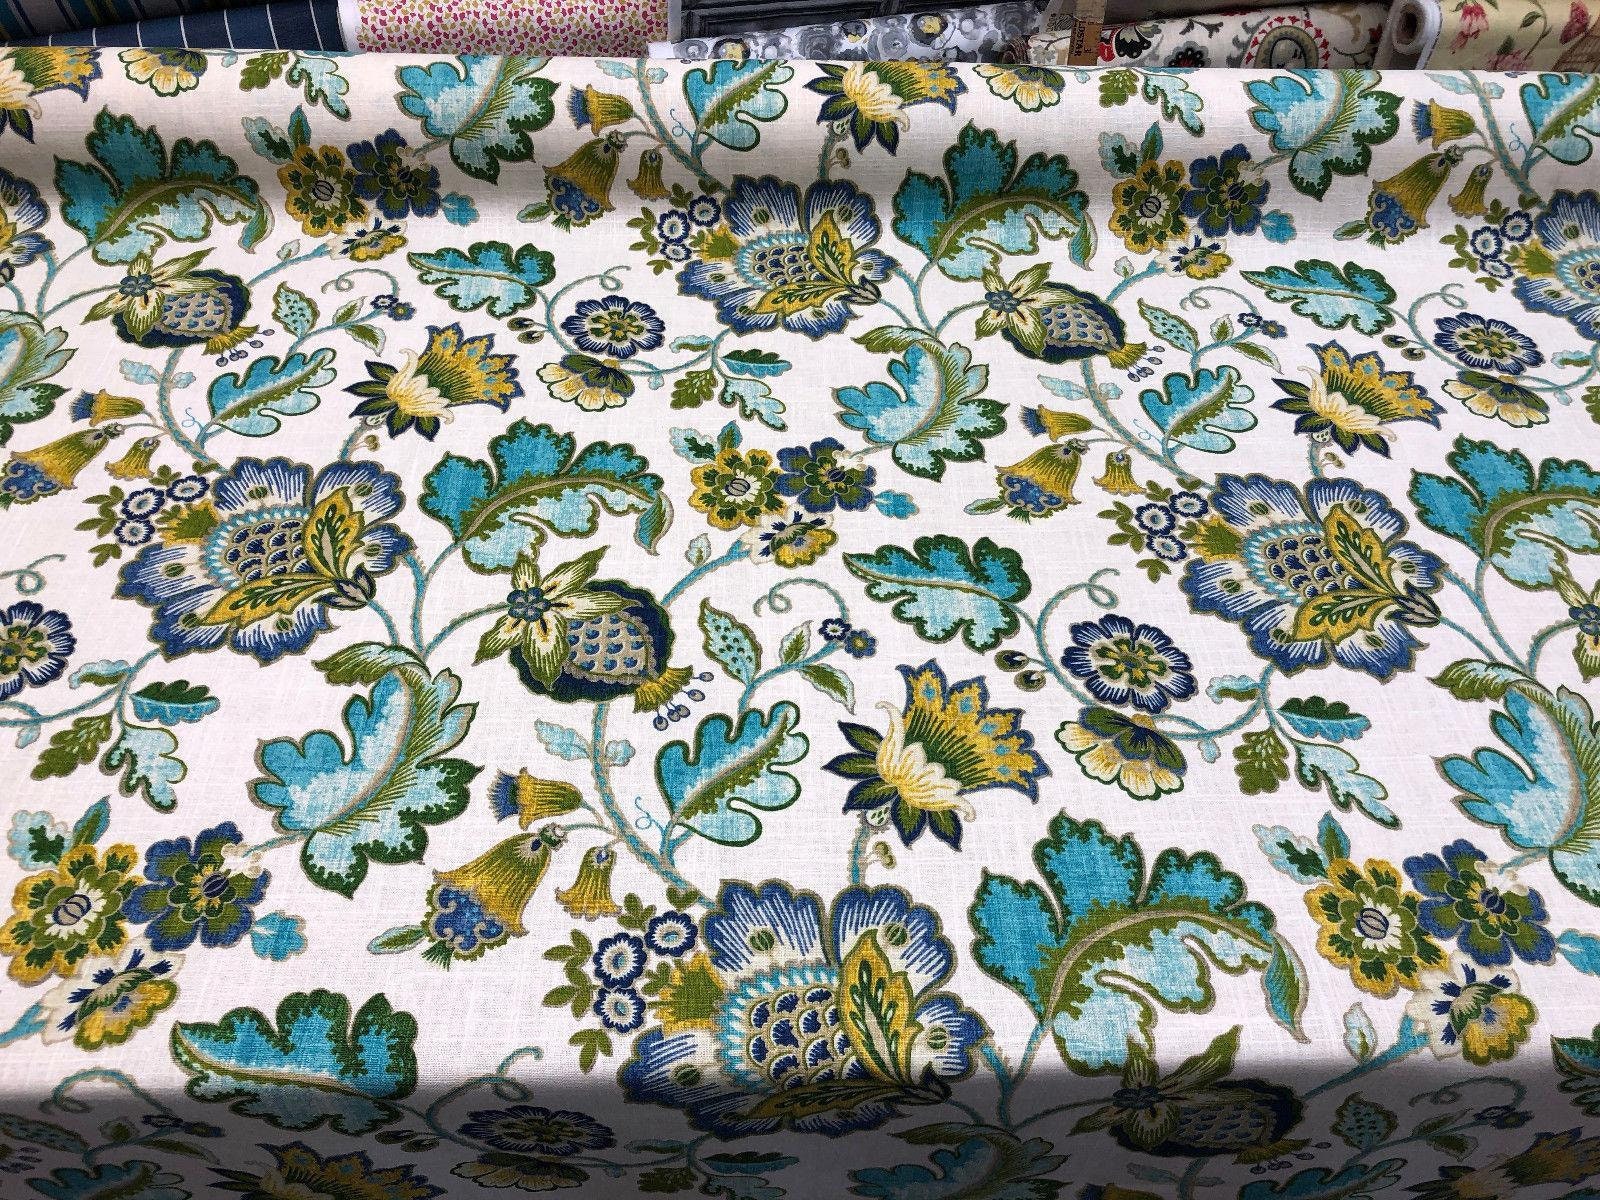 Bloomcraft Vintage Green Yellow Floral River Fabric By the Yard